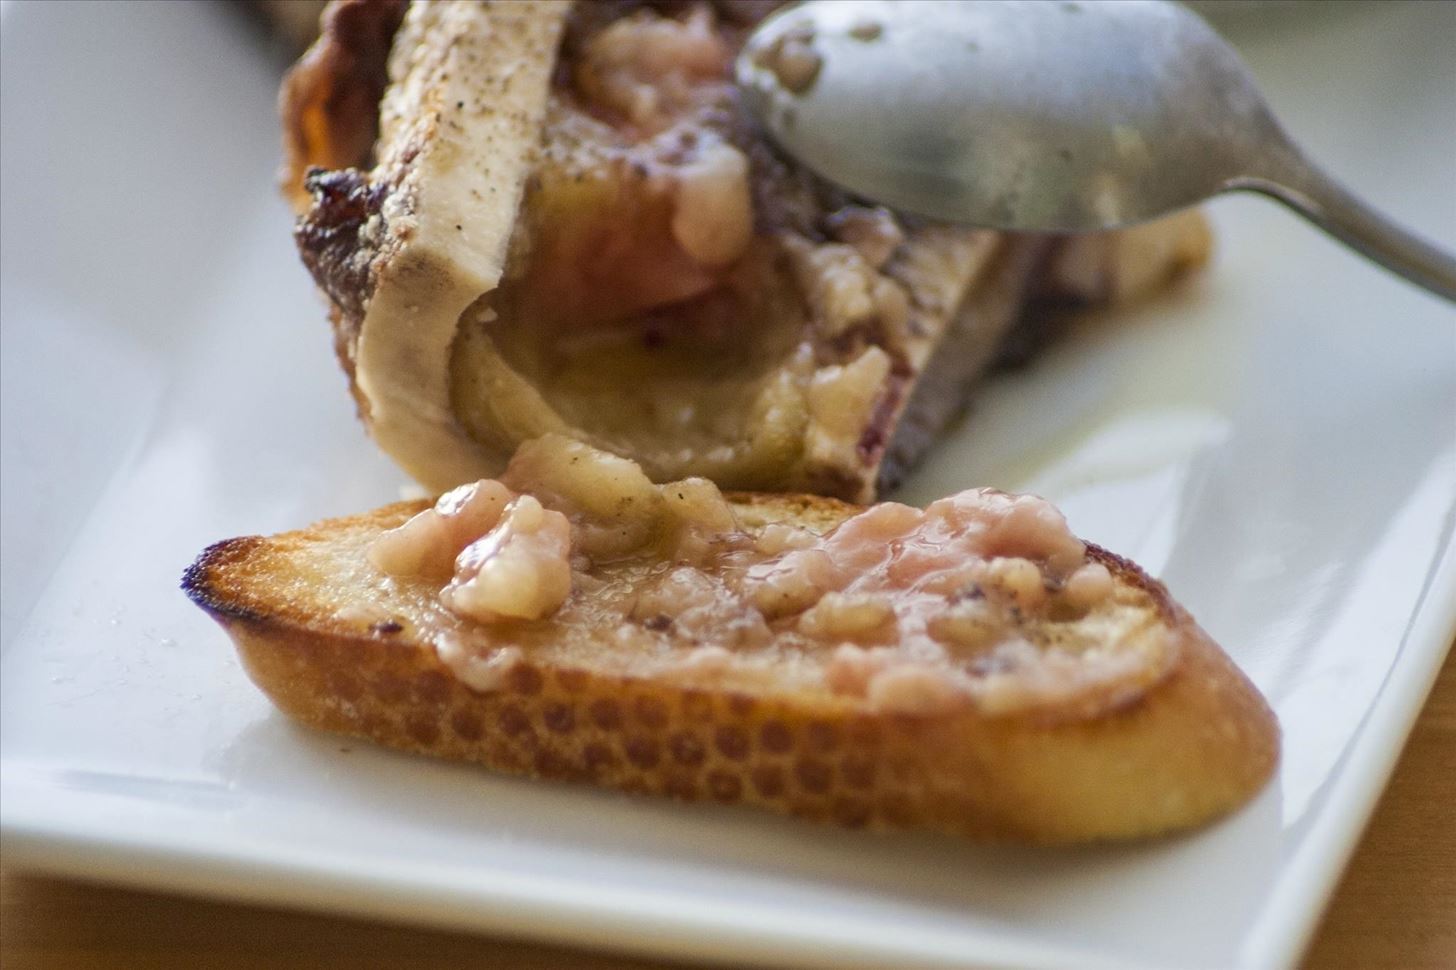 Weird Ingredient Wednesday: Bone Marrow, the Food That Tastes a Lot Better Than It Sounds